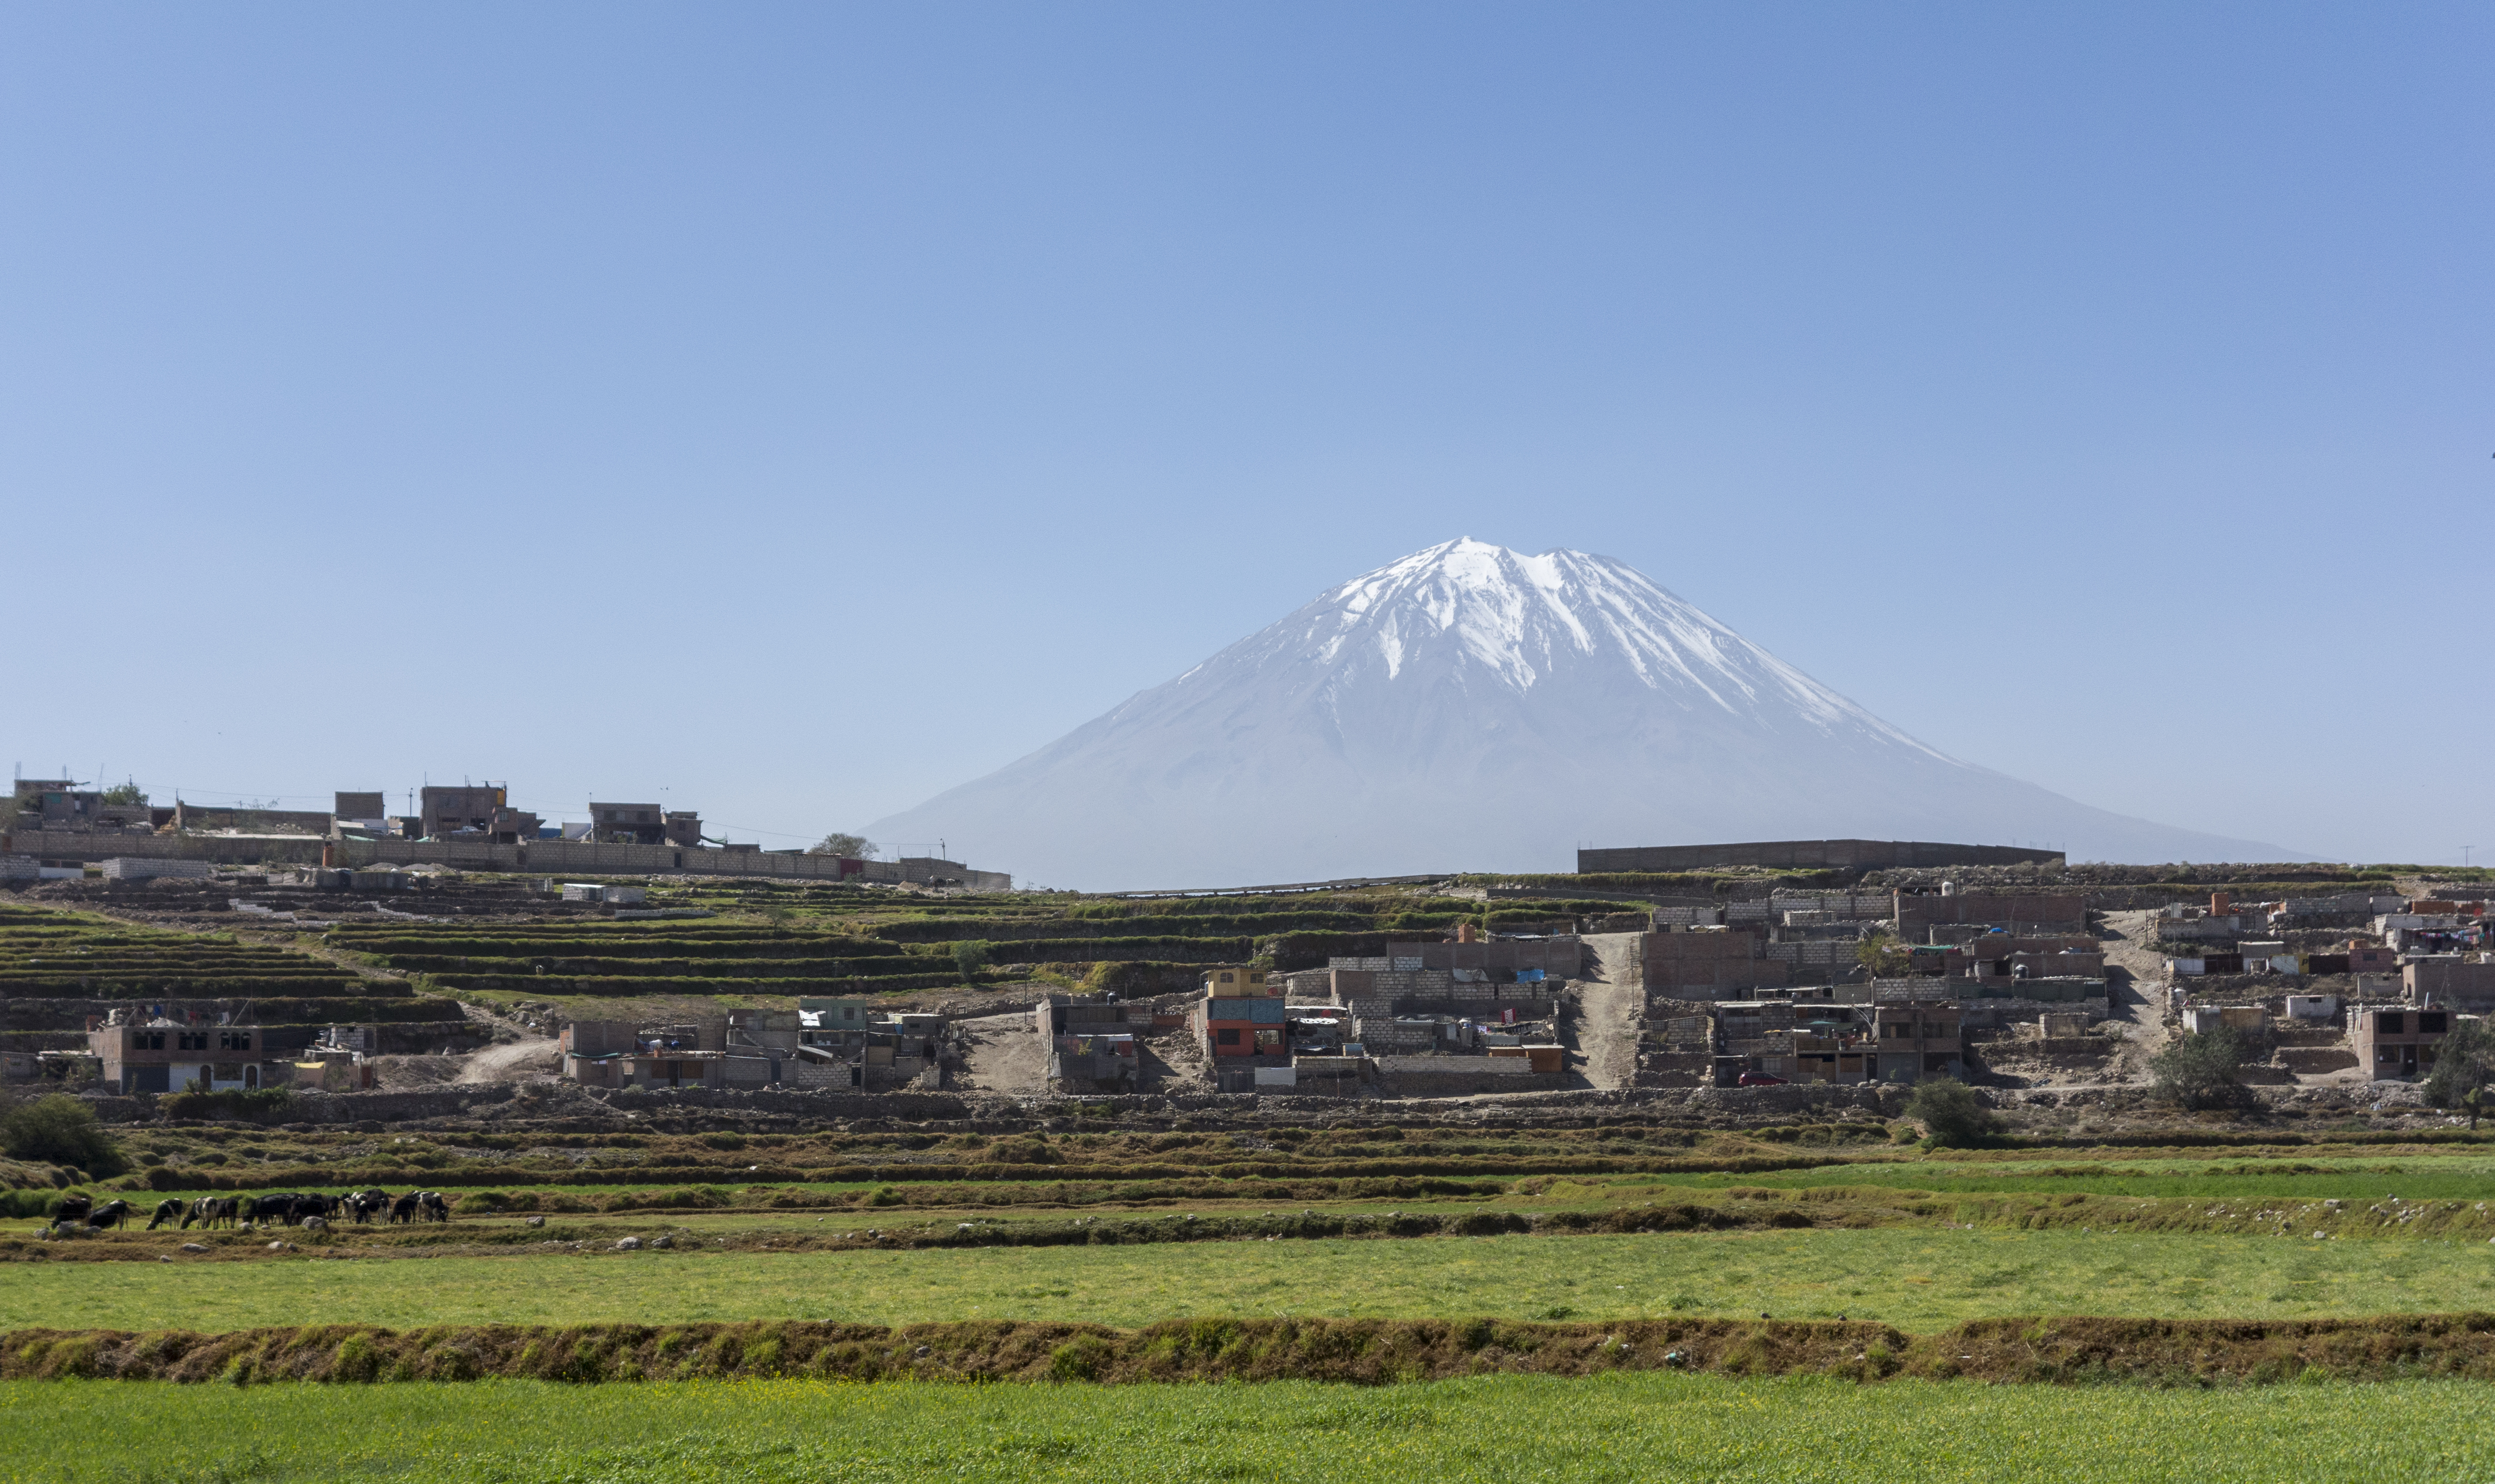 The Andean volcano Misti rises above the terraced agricultural land that surrounds the city of Arequipa, Peru,photo by A.Davey, 2013, CC BY-NC-ND 2.0 license